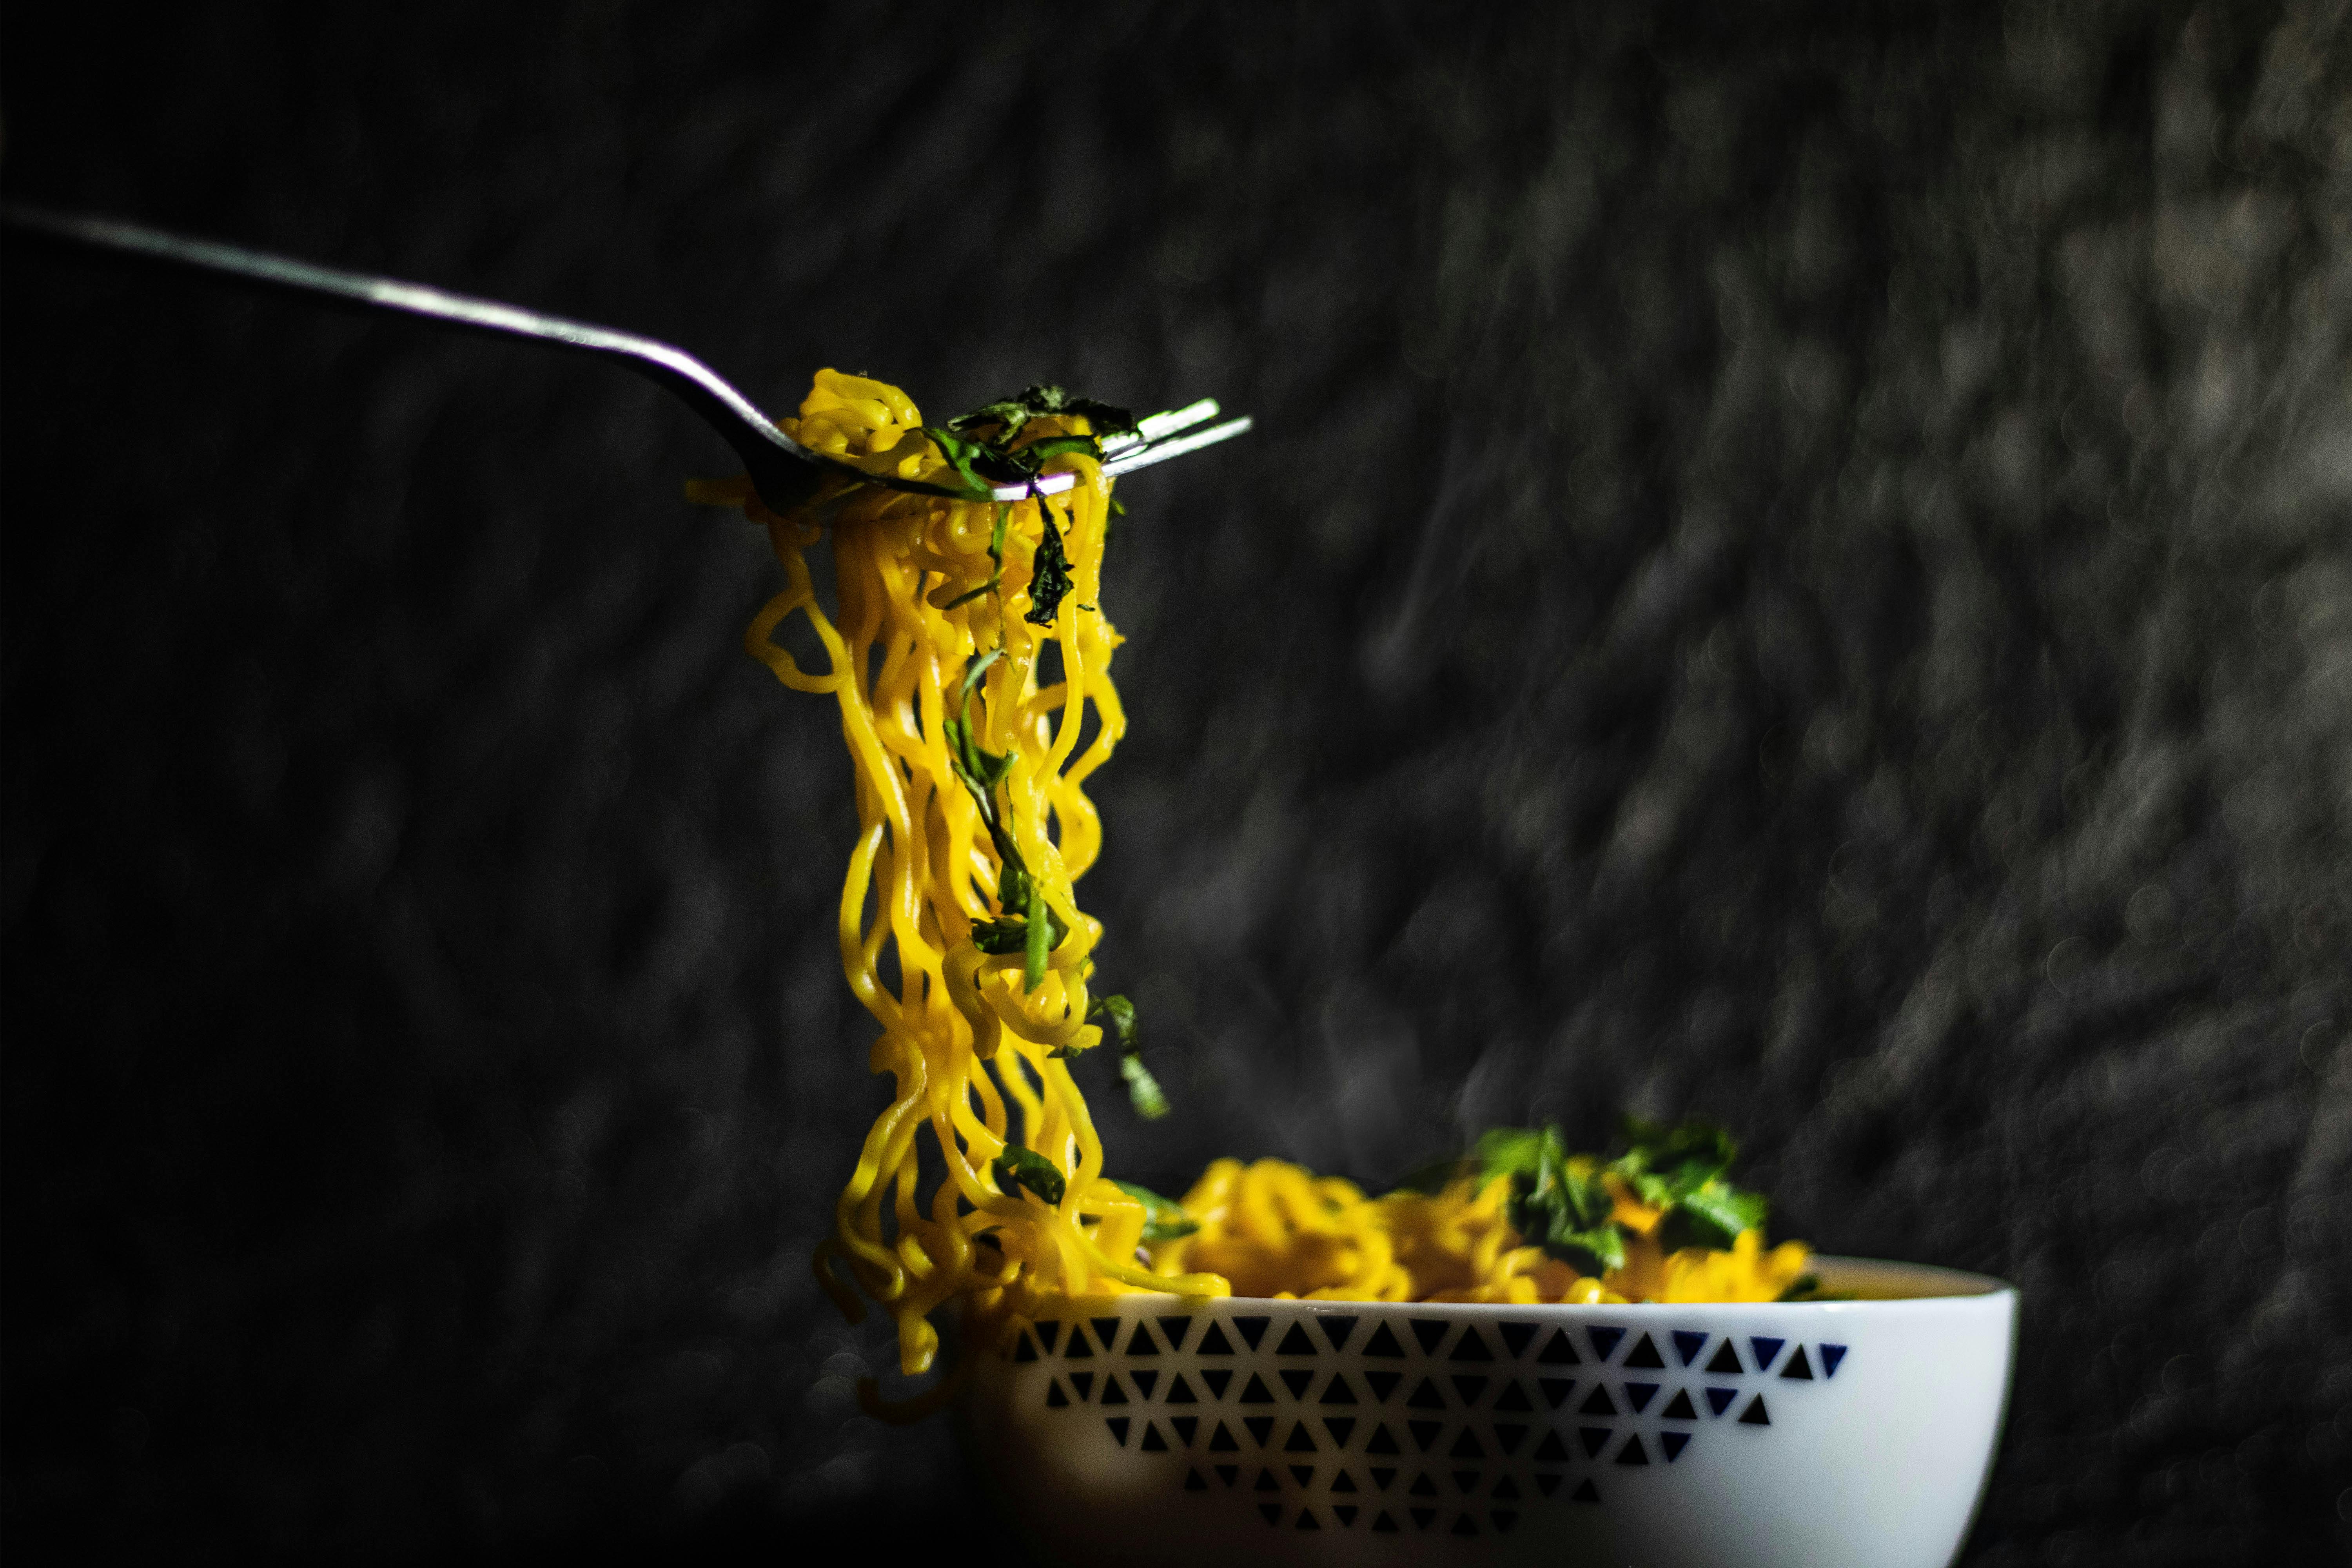 photo-of-noodles-on-fork-free-stock-photo